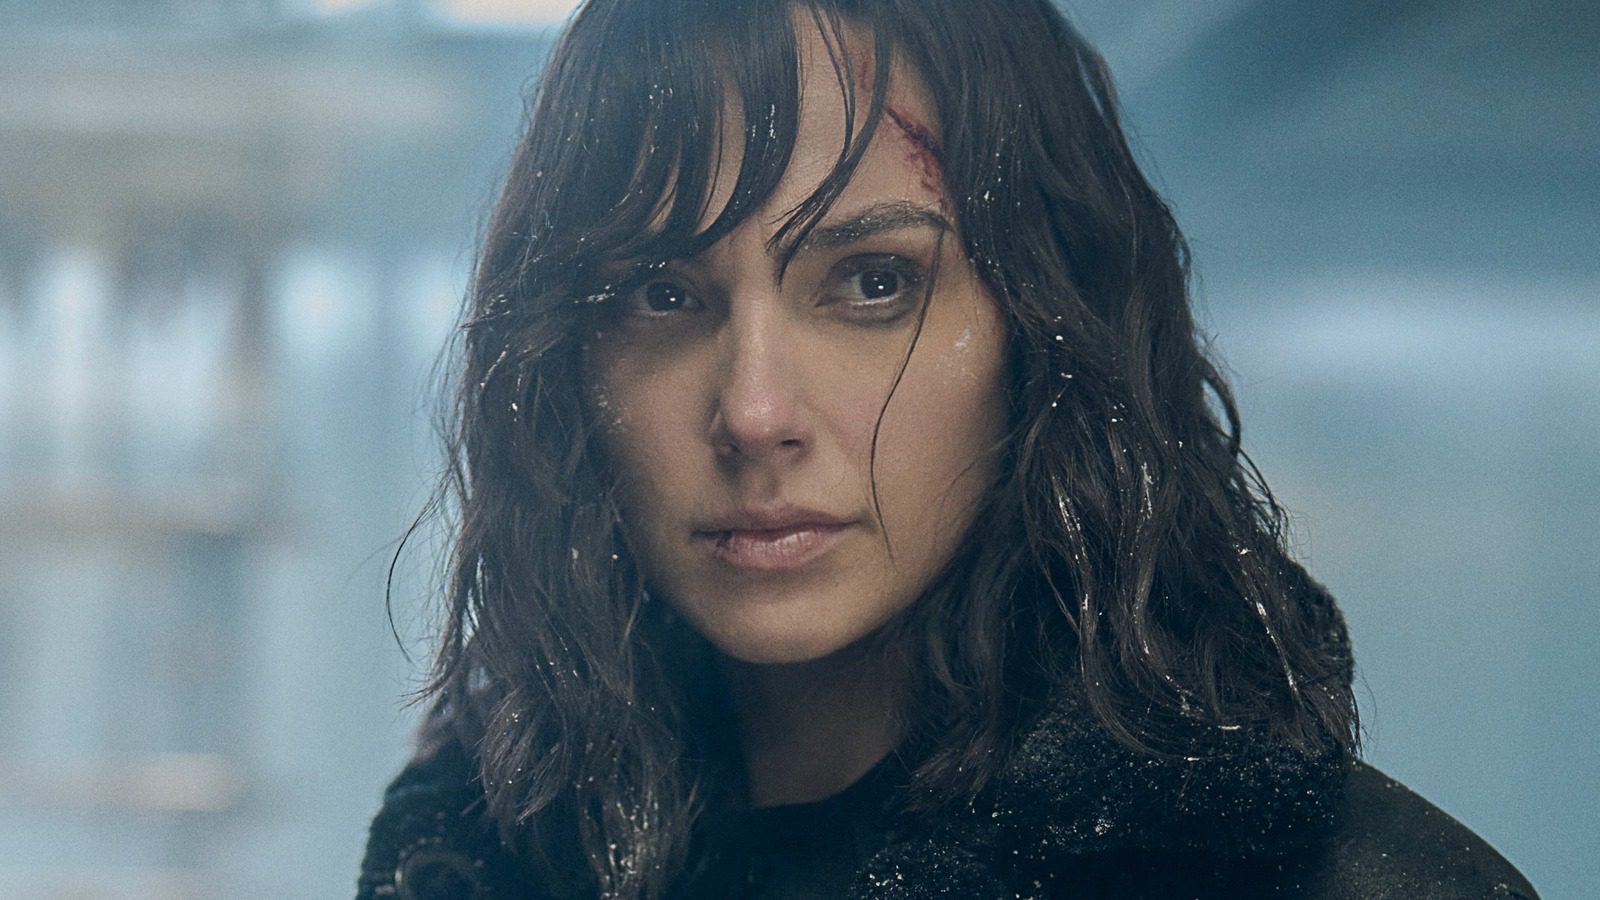 Gal Gadot Spy Thriller Lands With A Thud Among Rotten Tomatoes Critics